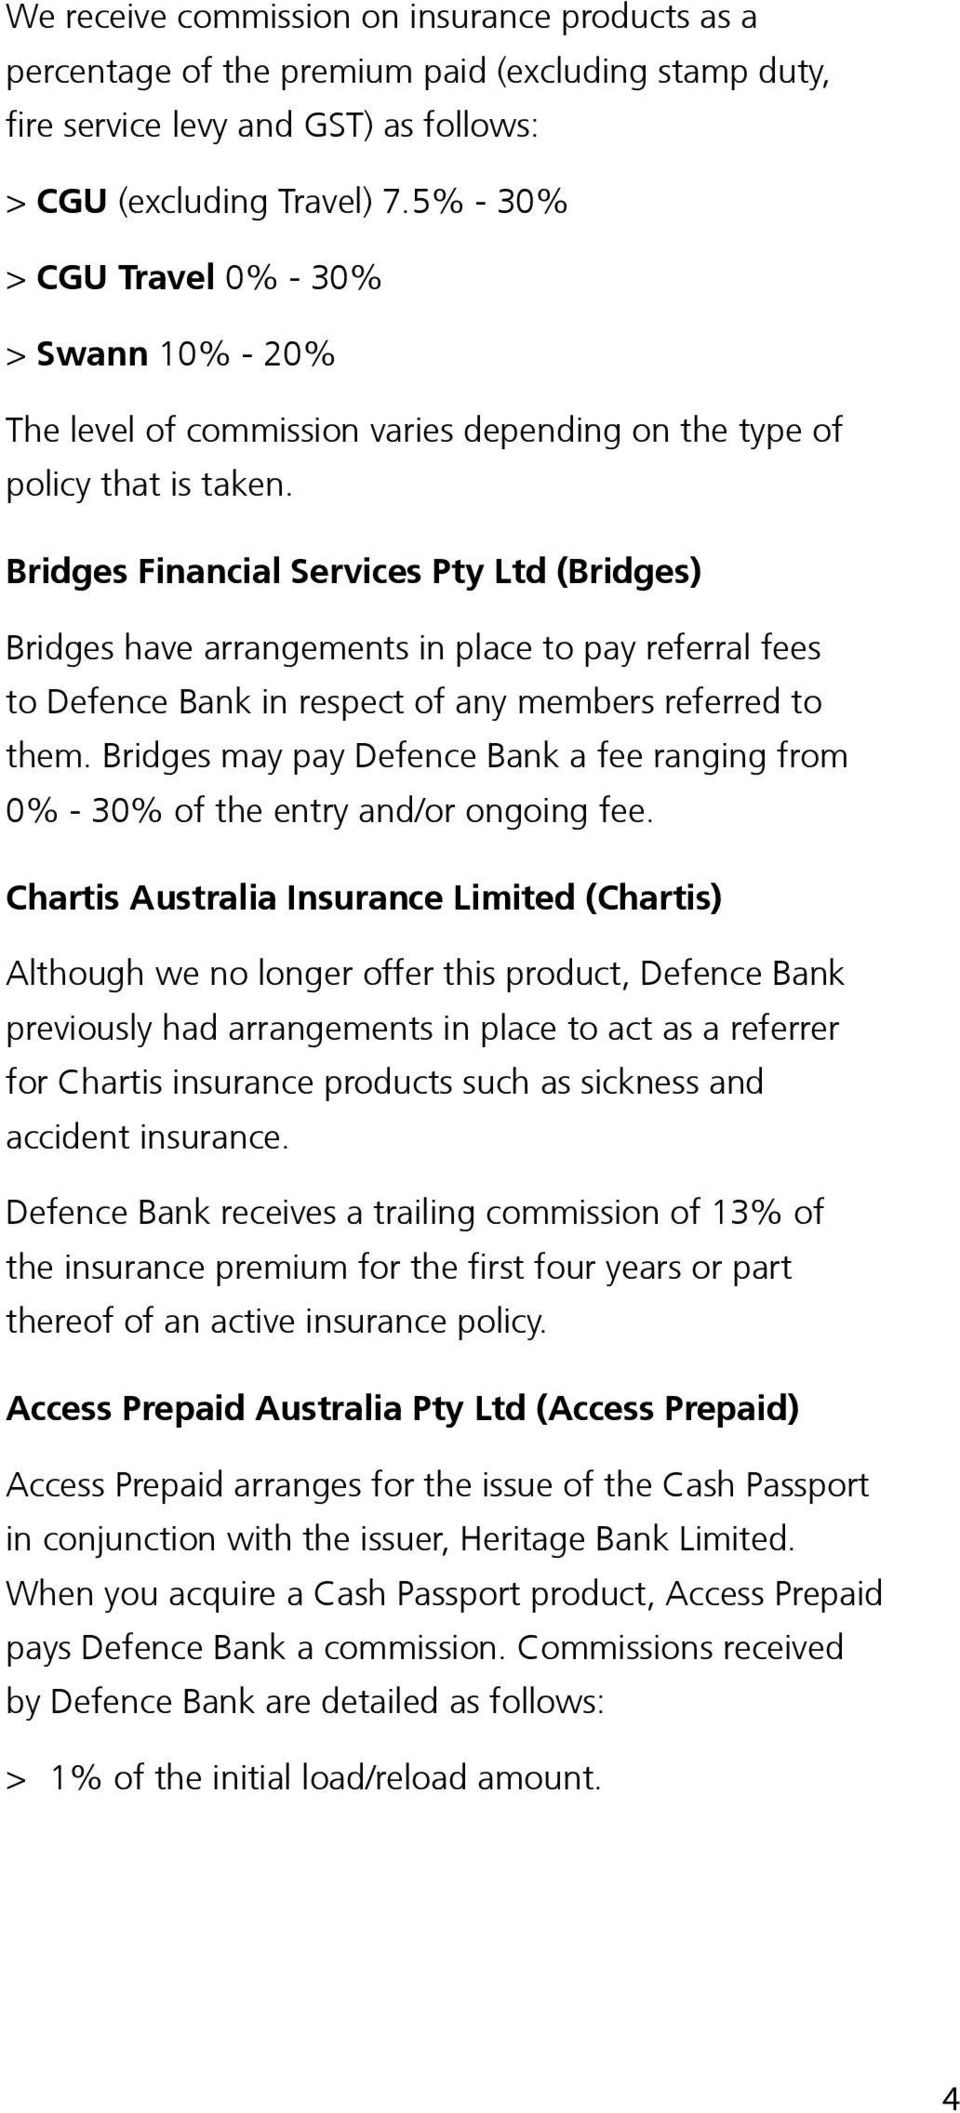 Bridges Financial Services Pty Ltd (Bridges) Bridges have arrangements in place to pay referral fees to Defence Bank in respect of any members referred to them.